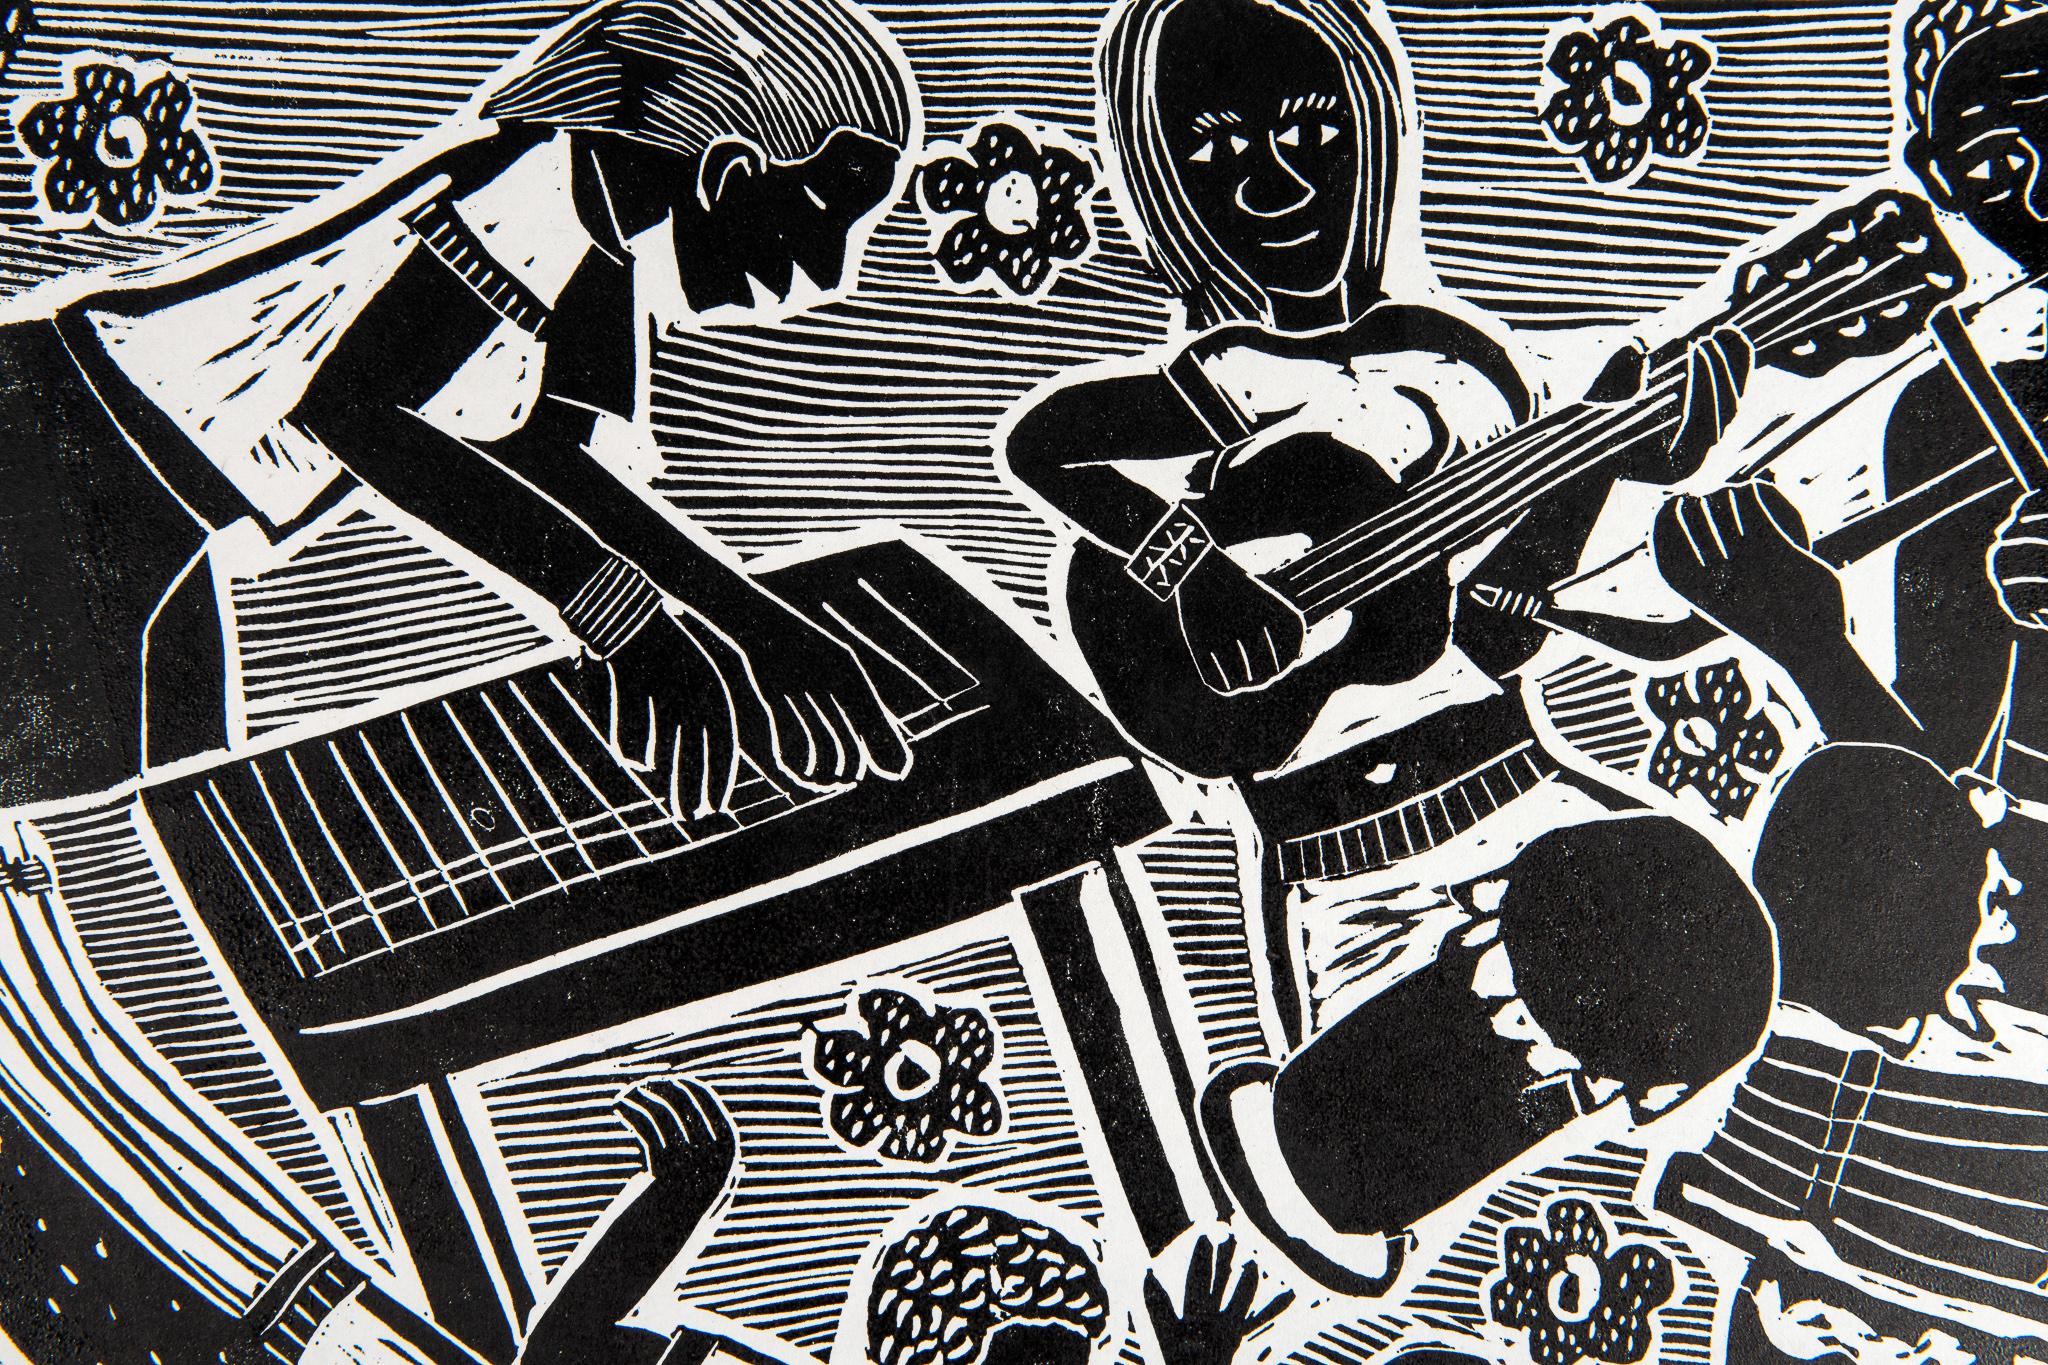 The sound of Namibia, 2020. Linoleum block print on paper. Edition of 5.

Elia Shiwoohamba was born in 1981 in Windhoek, Namibia. He graduated from the John Muafangejo Art Centre in Windhoek in 2006. Specialising in printmaking and sculpture,